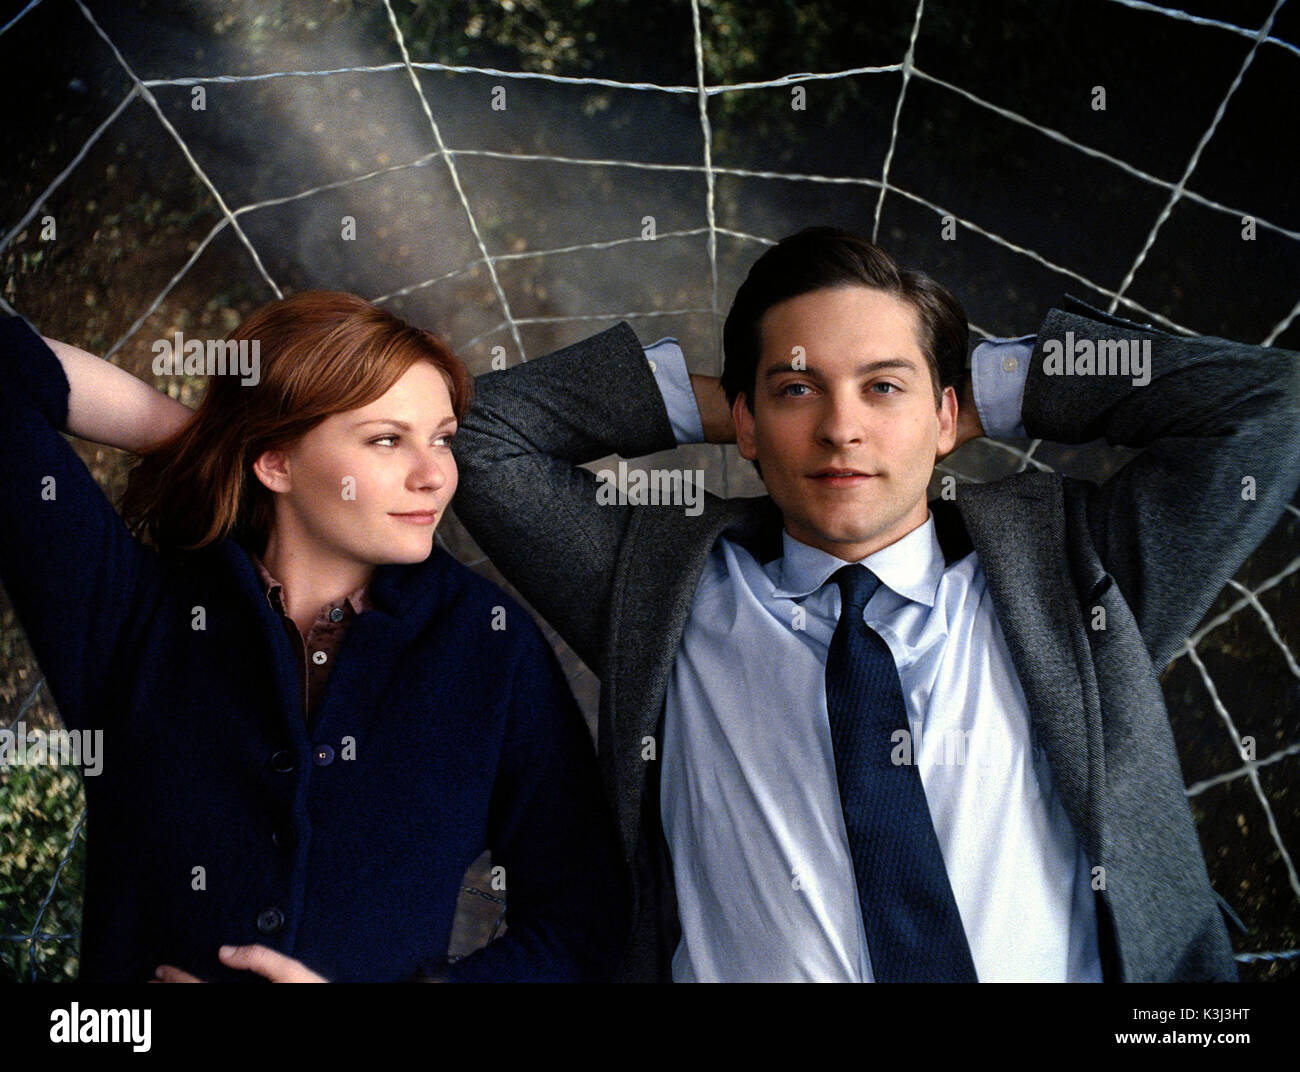 Kirsten Dunst, Tobey Maguire SPIDER-MAN 3 KIRSTEN DUNST as Mary Jane Watson, TOBEY MAGUIRE as Peter Parker / Spider-man     Date: 2007 Stock Photo